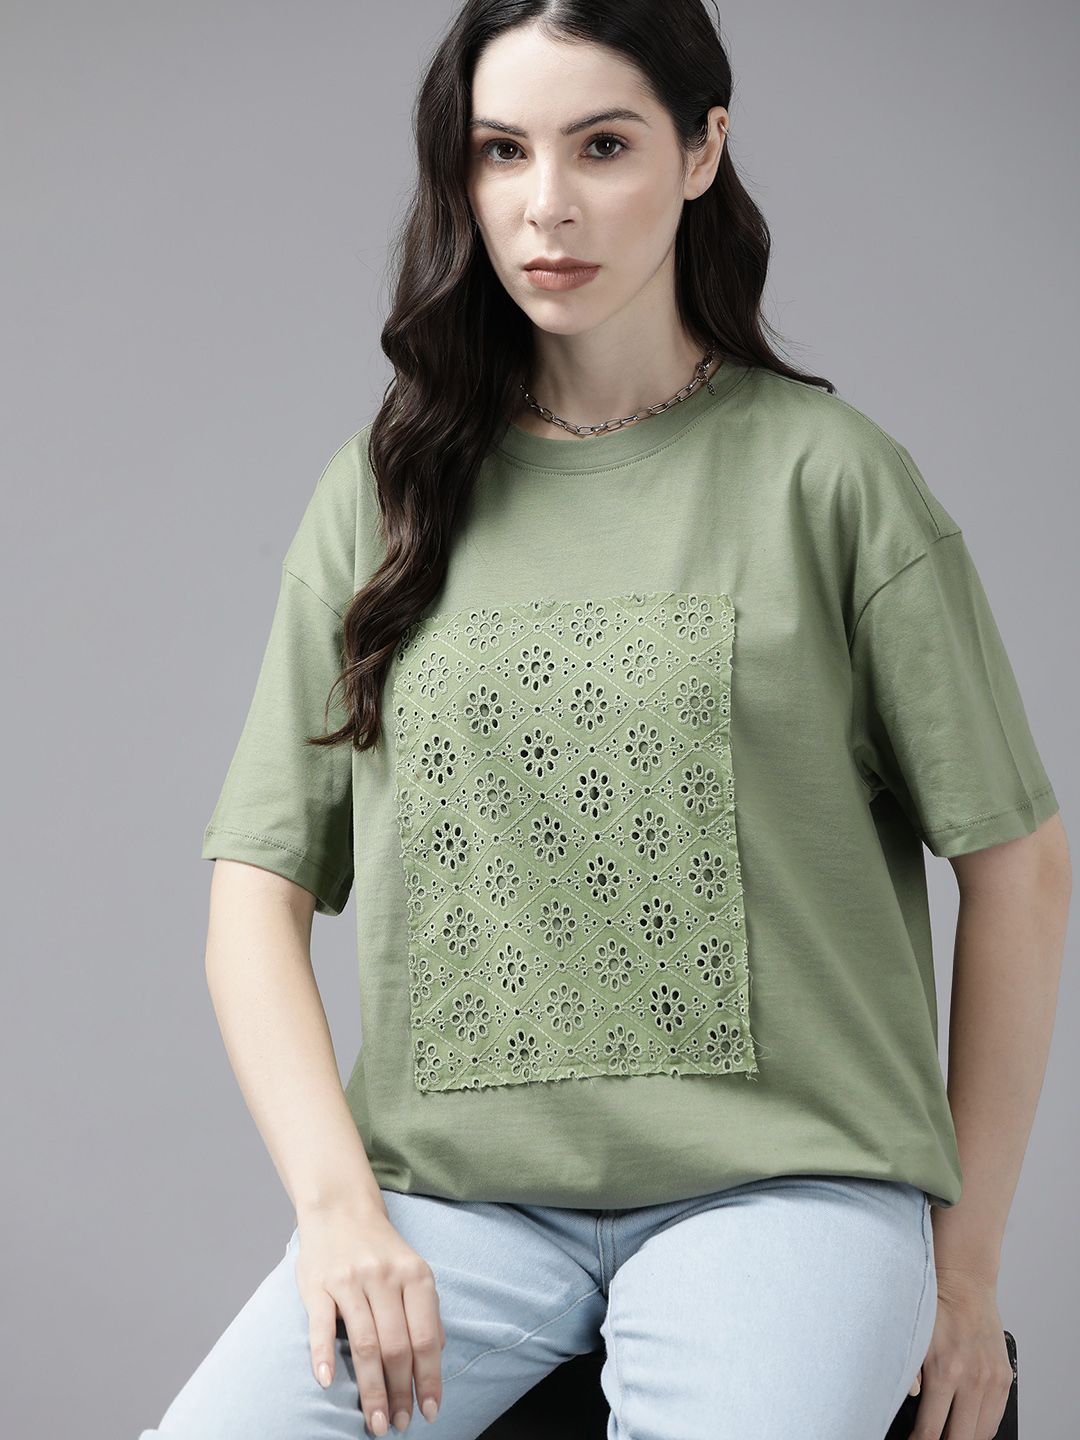 The Roadster Lifestyle Co.Schiffli Embroidered Cotton Top